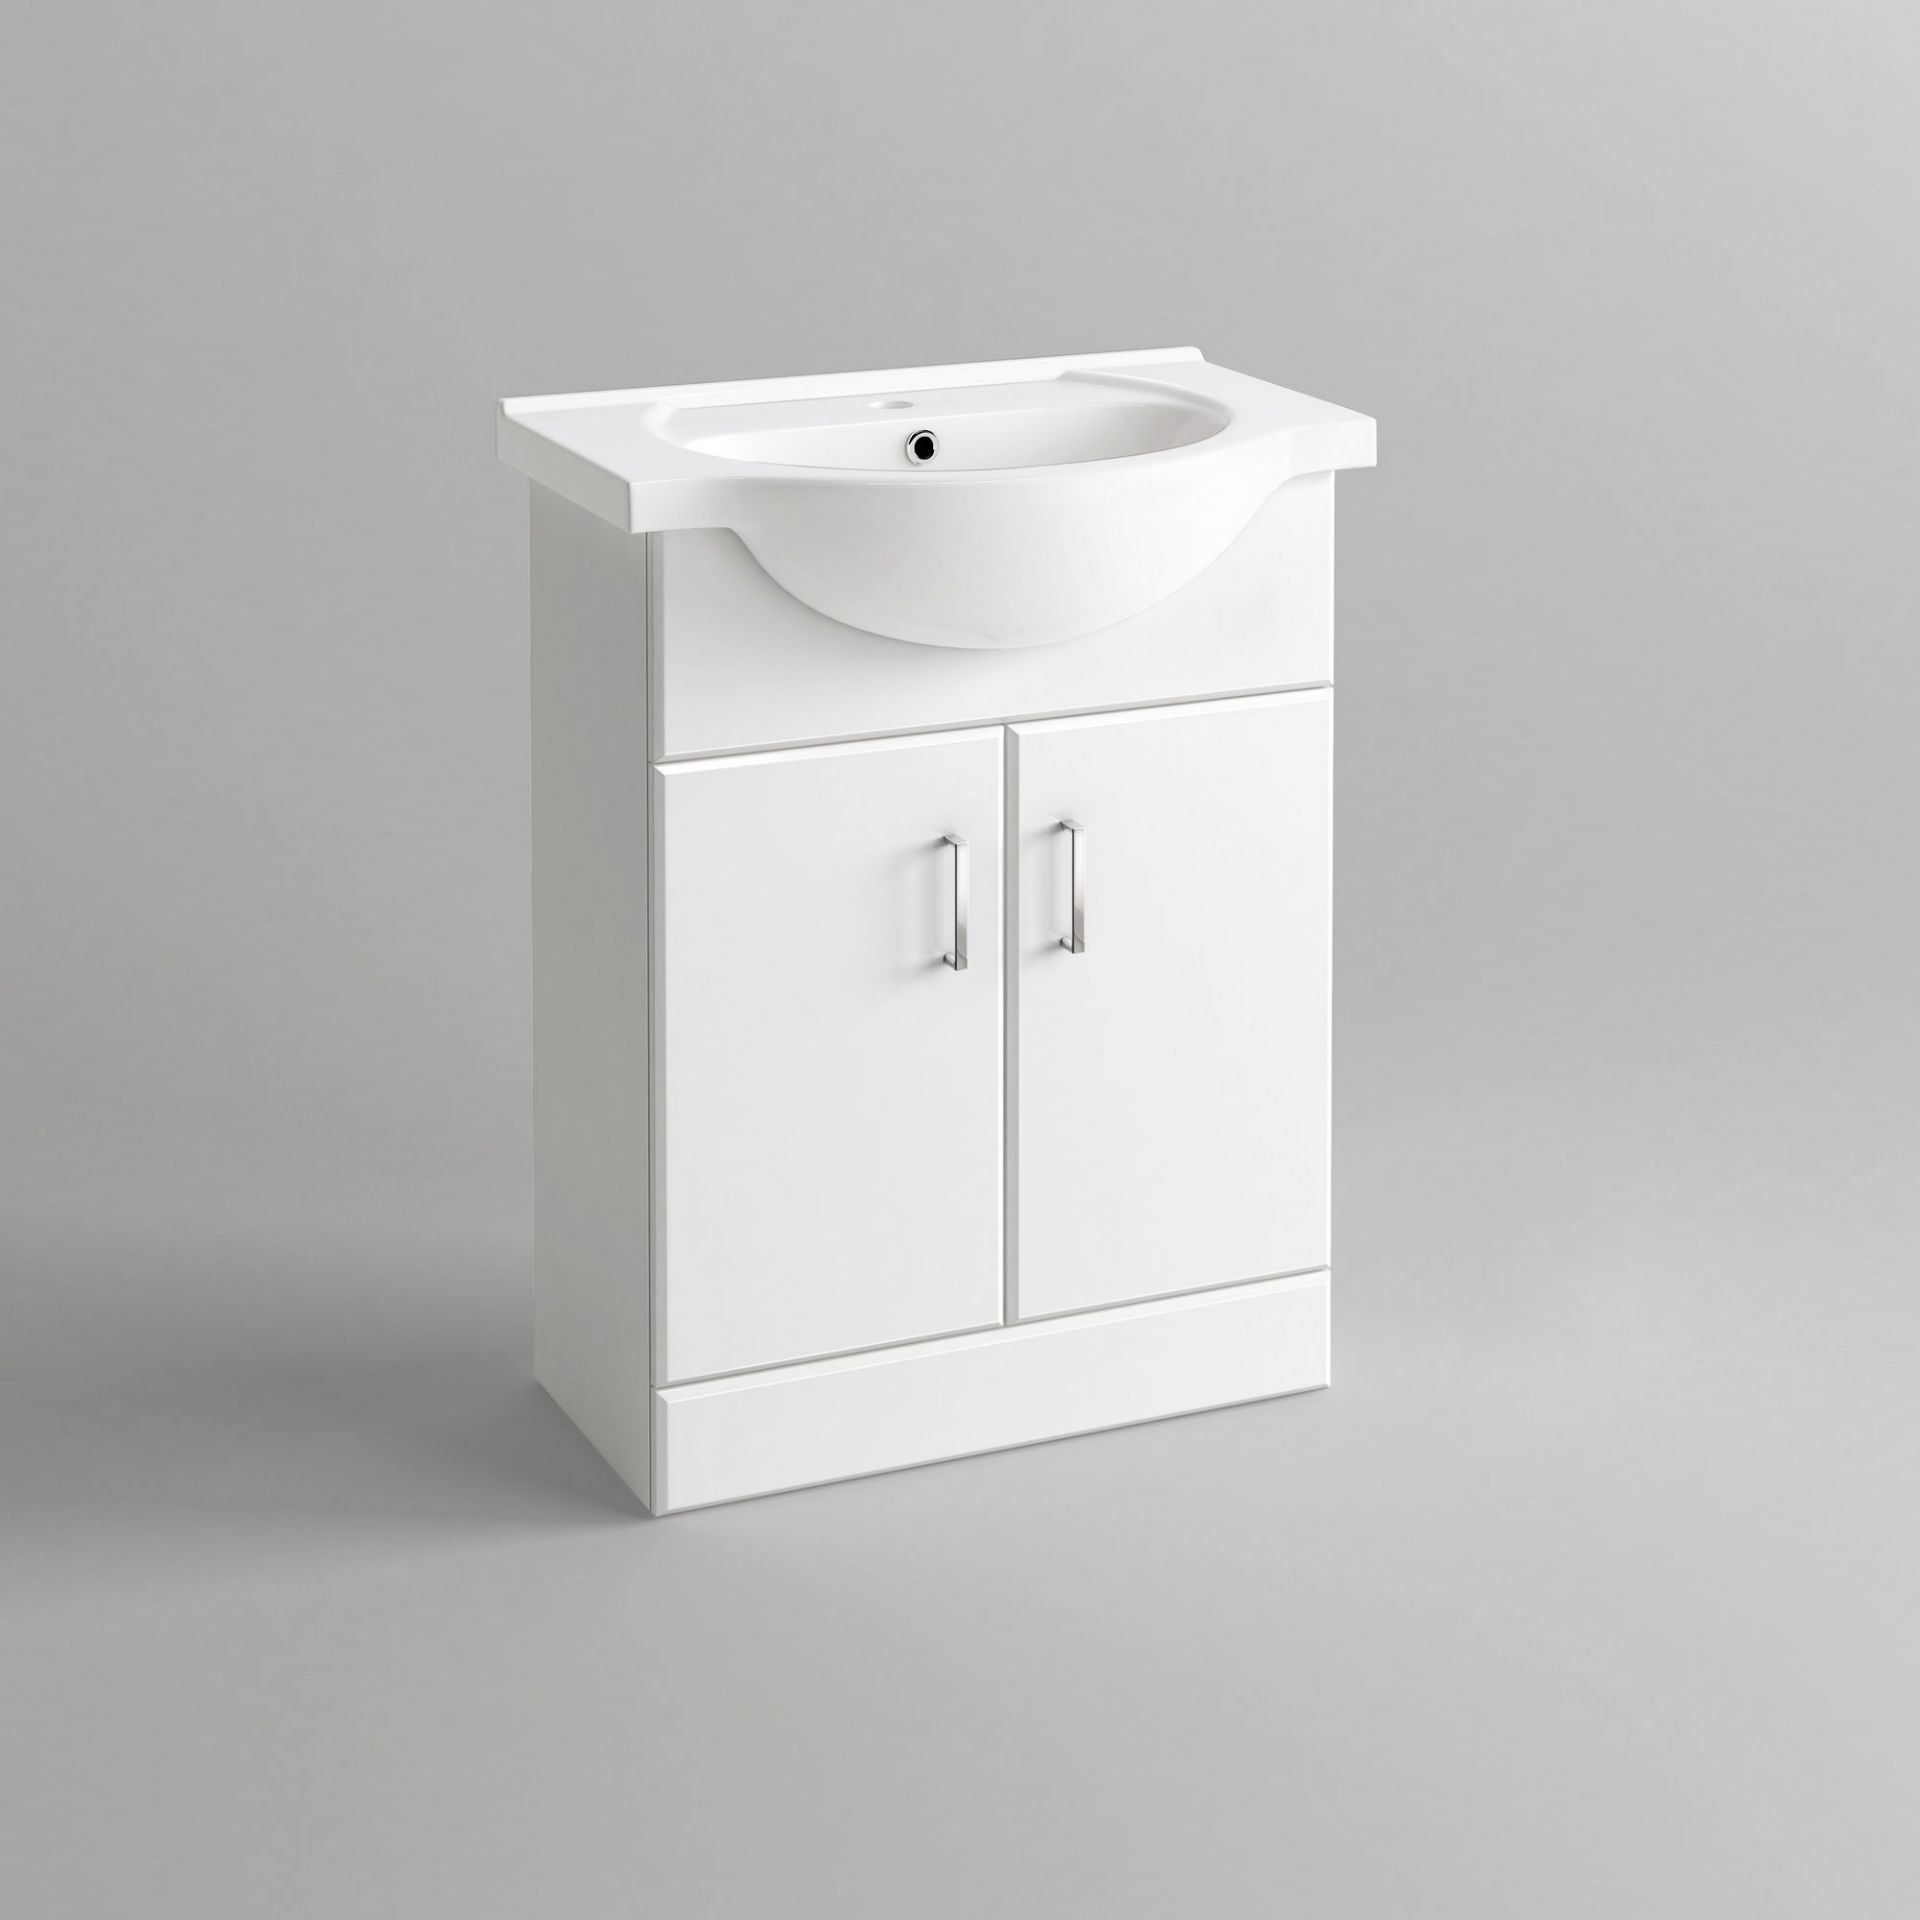 (YC50) 550x300mm Quartz Gloss White Built In Basin Cabinet. RRP £349.99. Comes complete with - Image 3 of 4